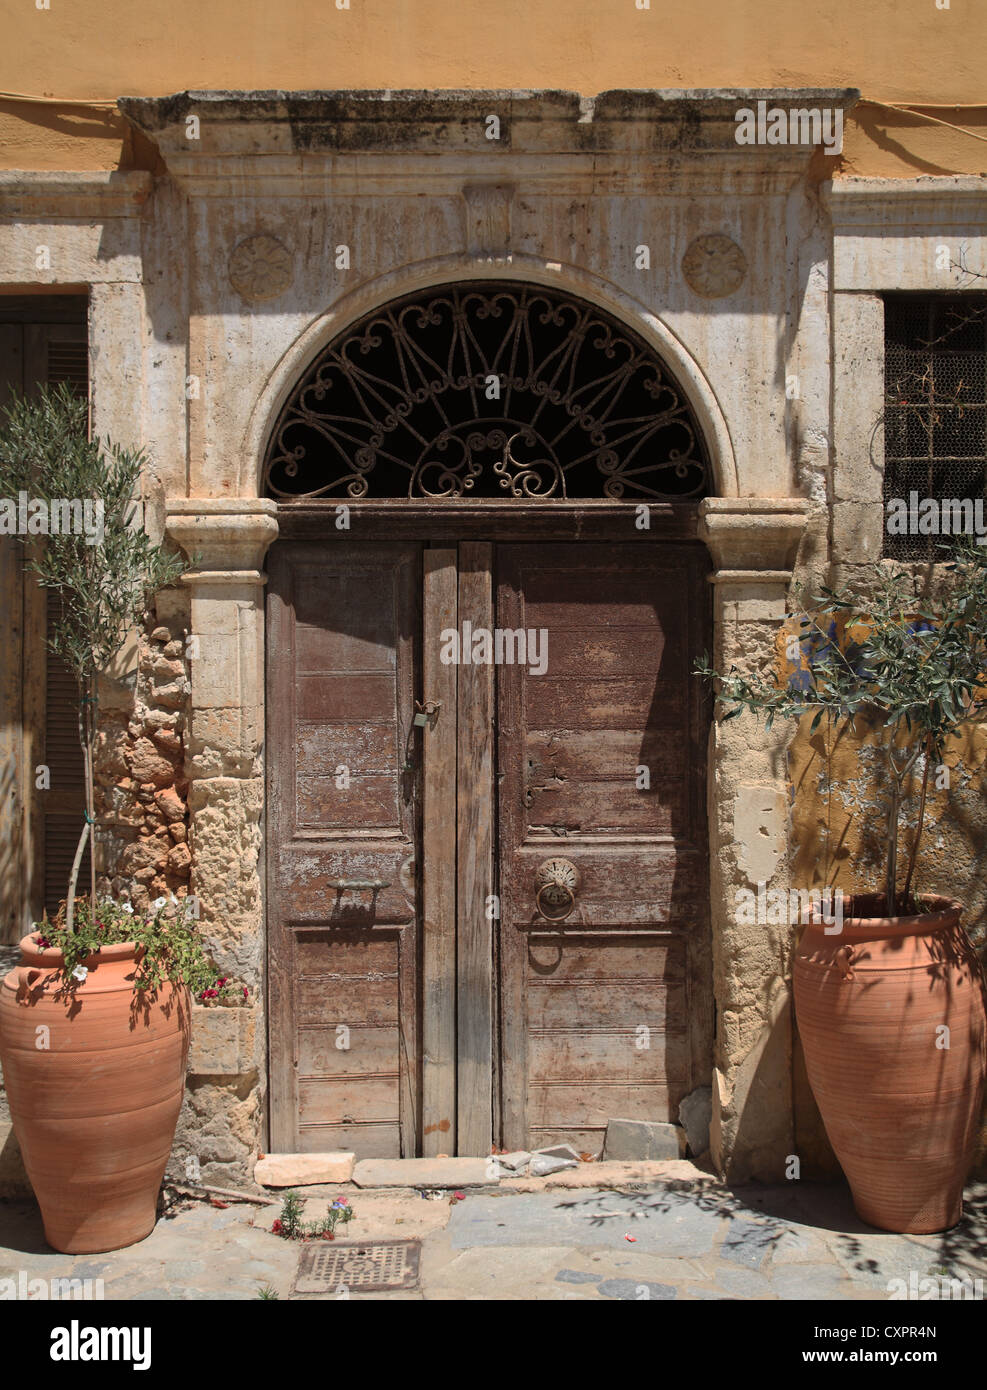 Painted doors in ornate gateway with large pots containing olive trees on either side, Hania/Chania, Crete, Cyclades, Greece Stock Photo